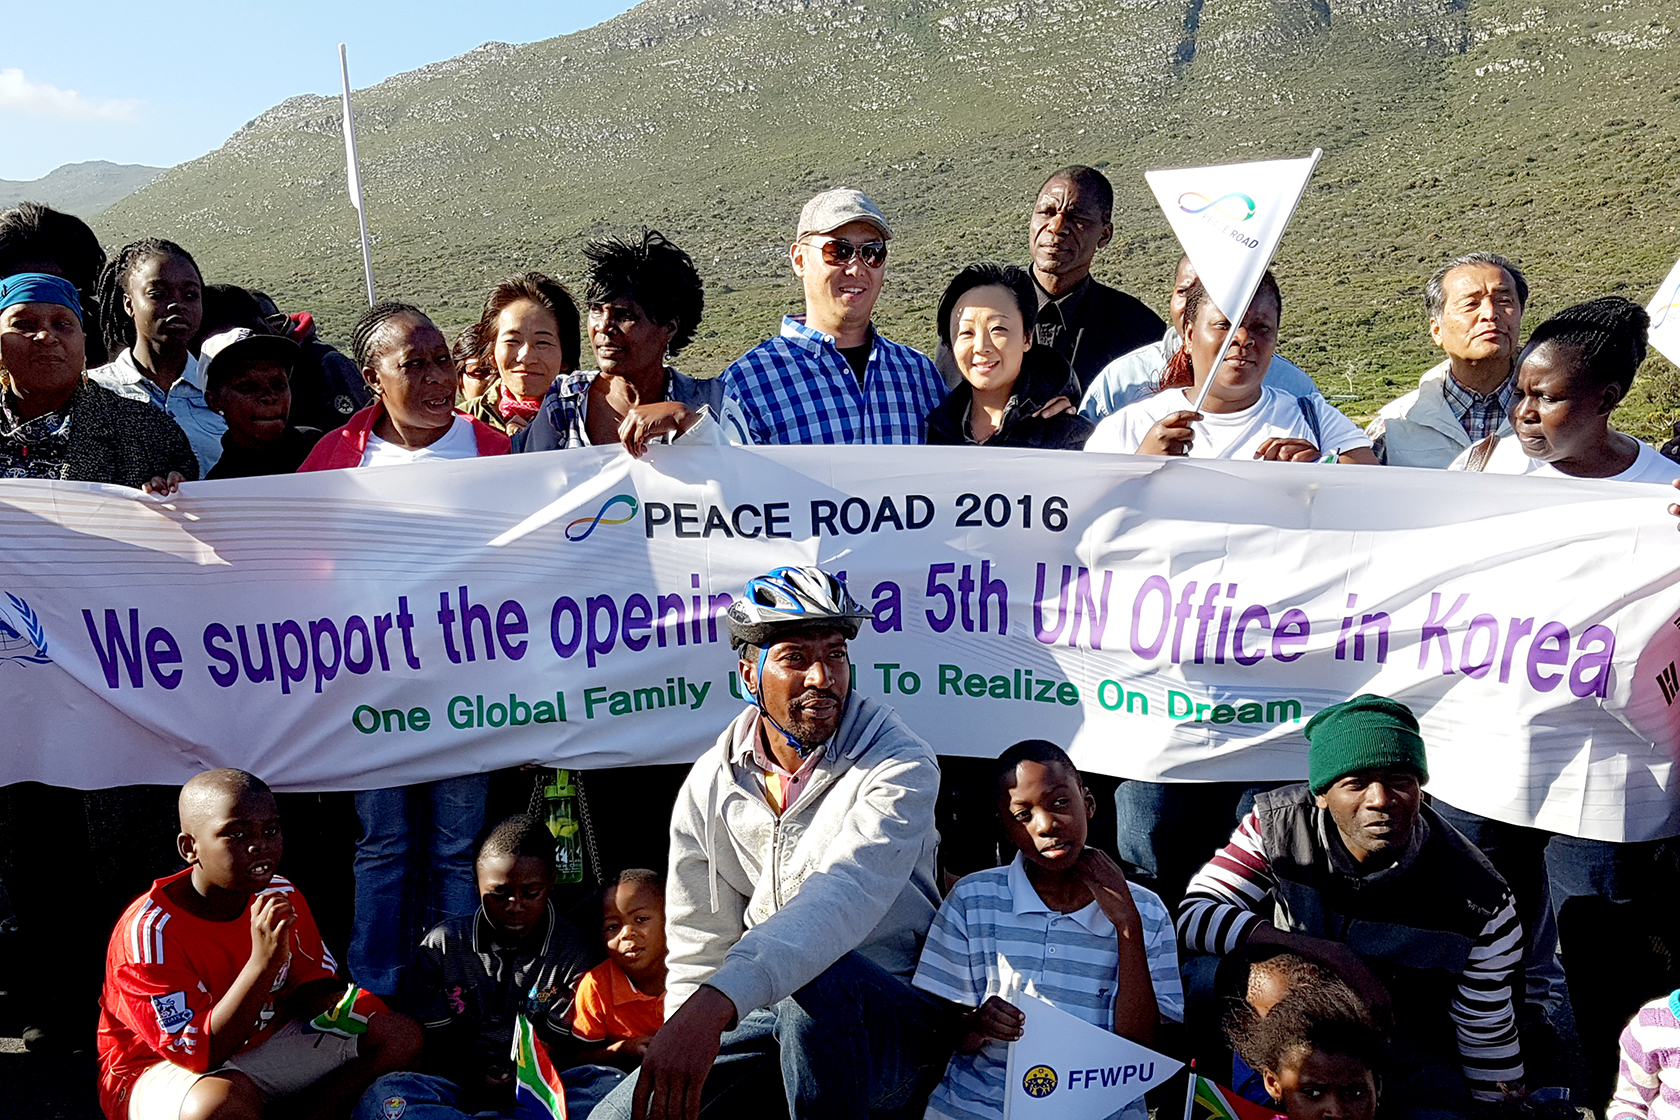 PeaceRoad2016 in South Africa (November 9 2016)